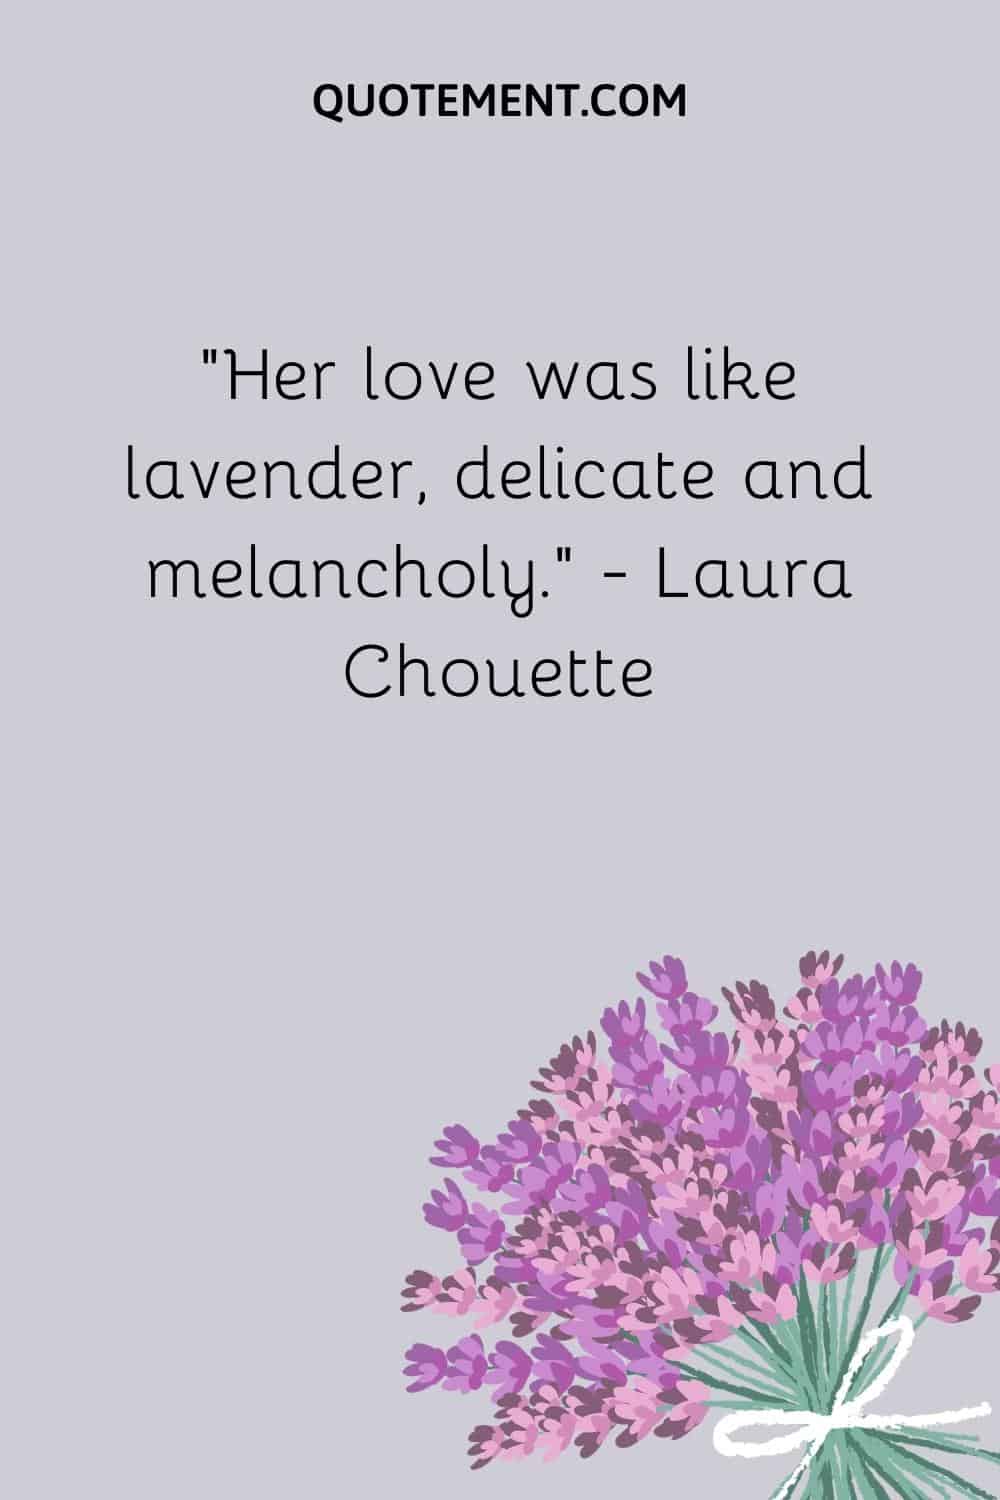 “Her love was like lavender, delicate and melancholy.” ― Laura Chouette